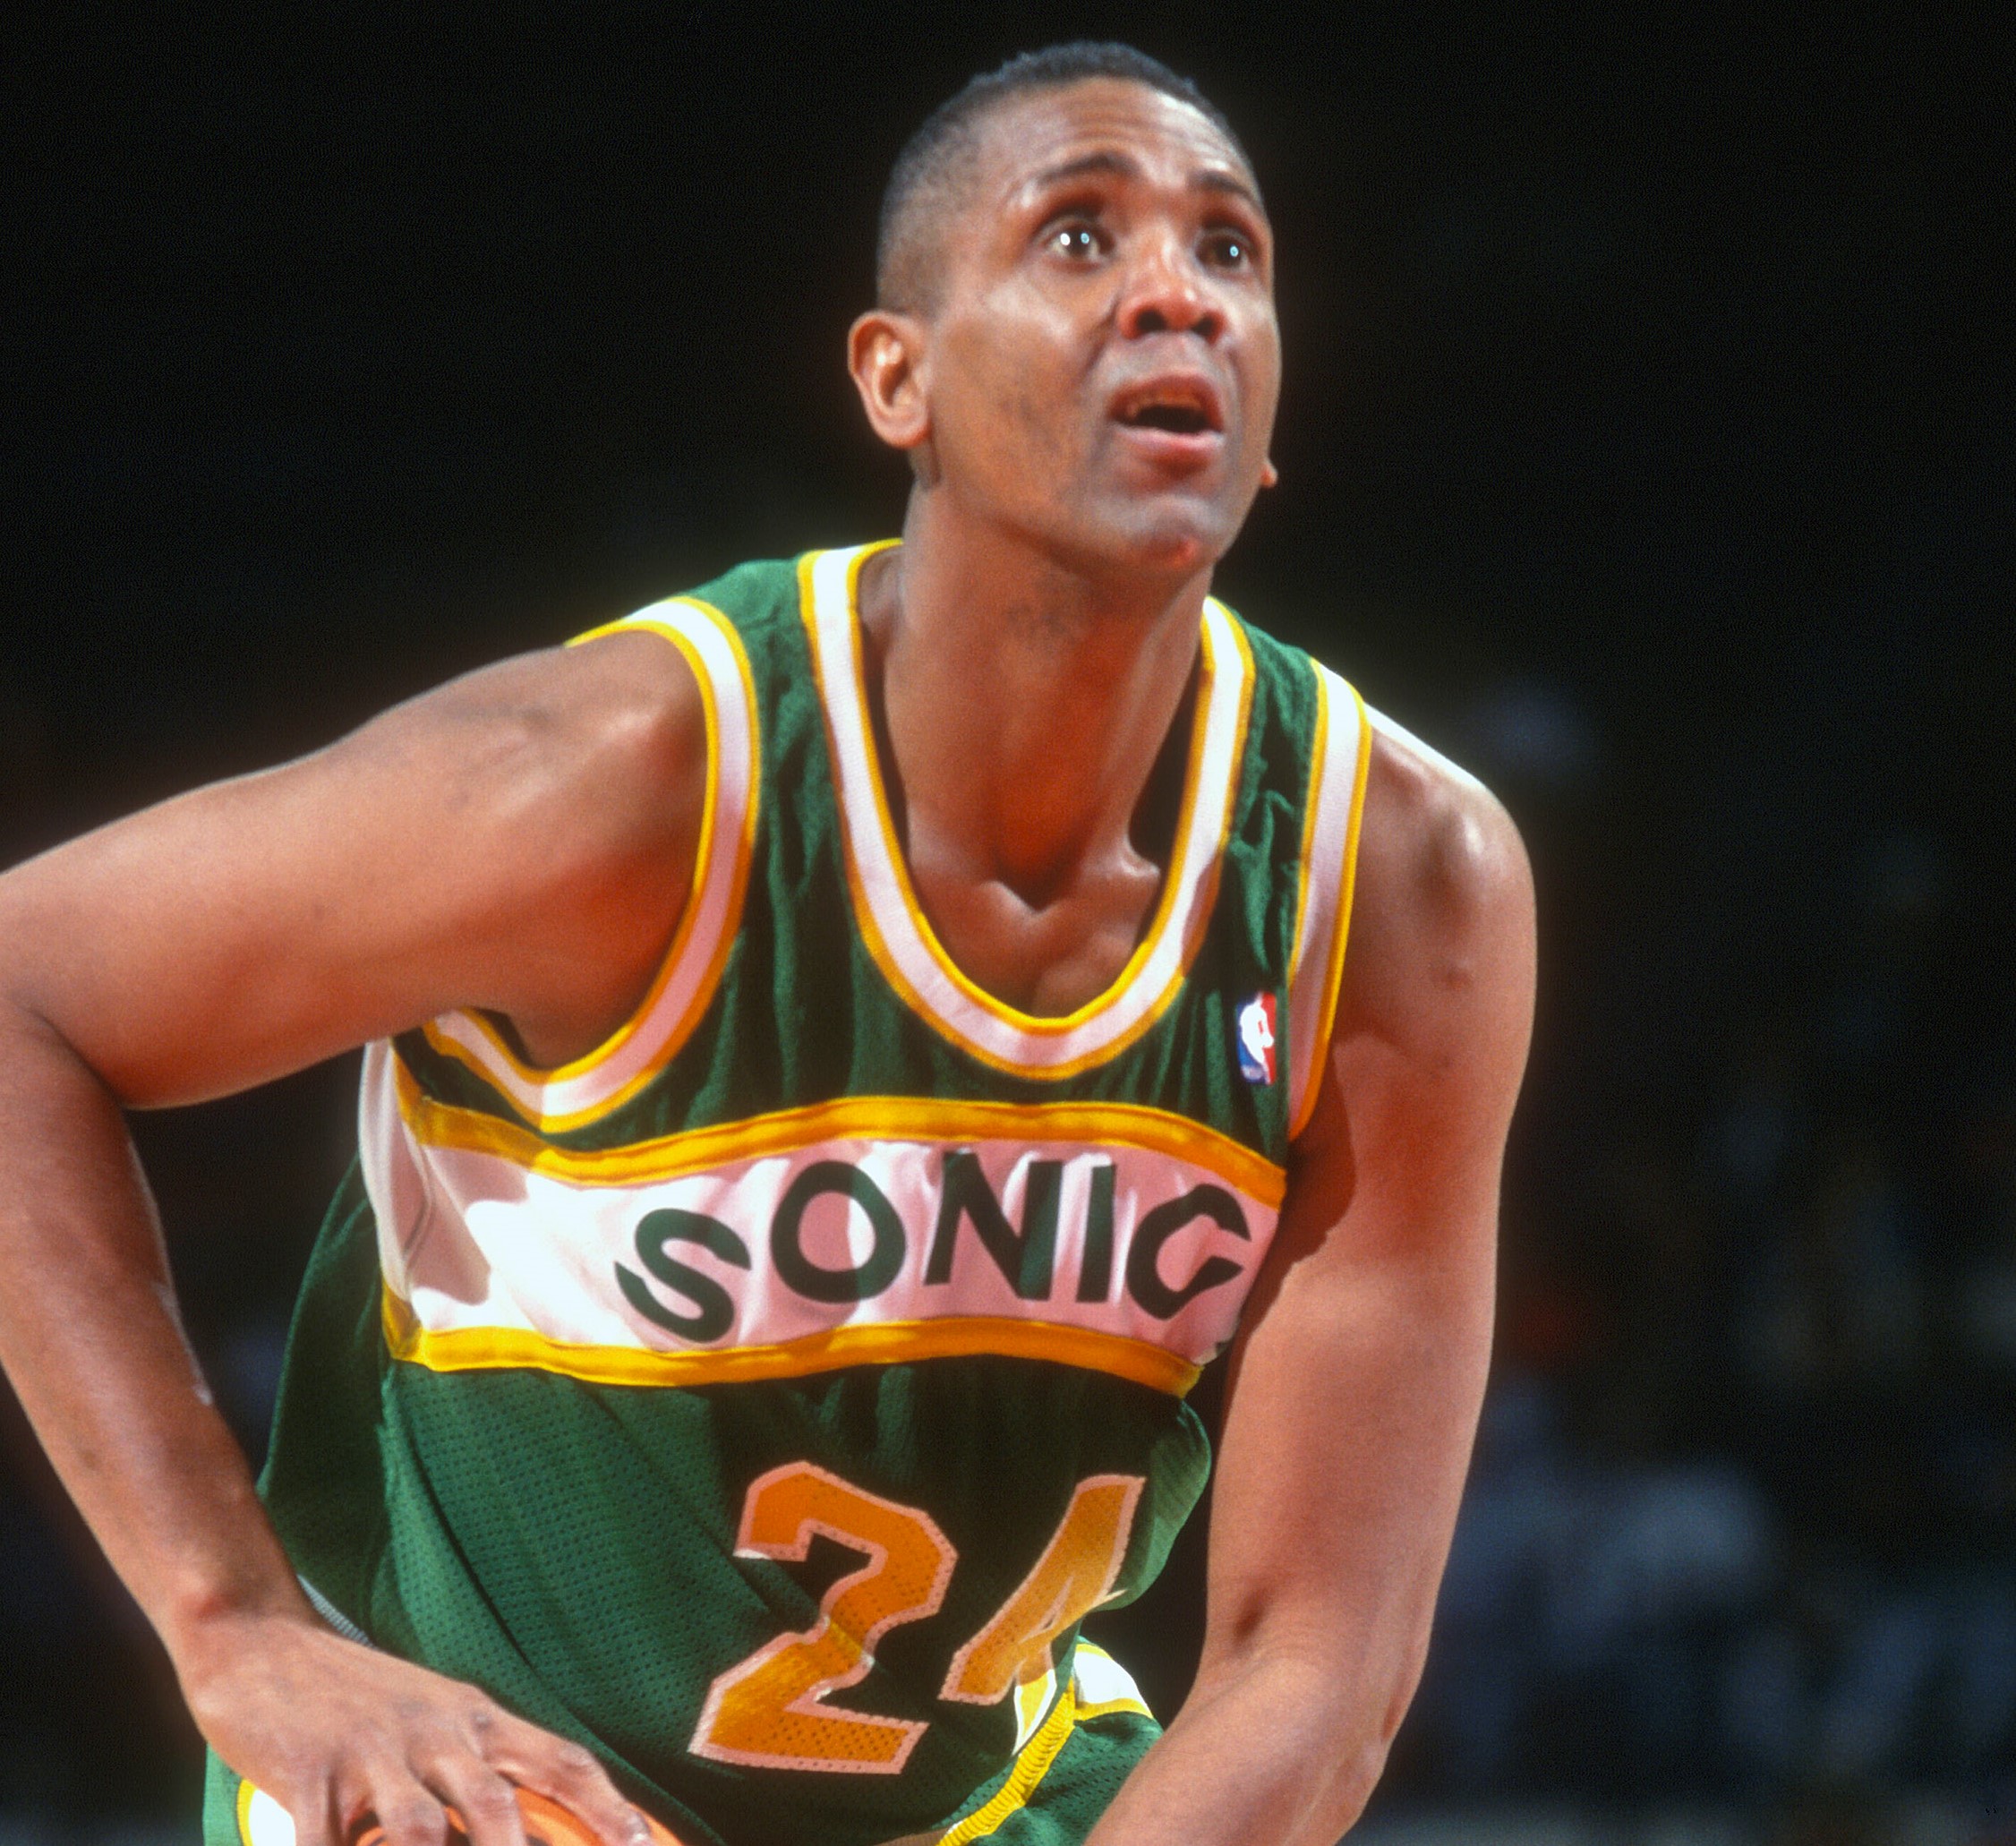 Who was the final draft pick of the Seattle SuperSonics?